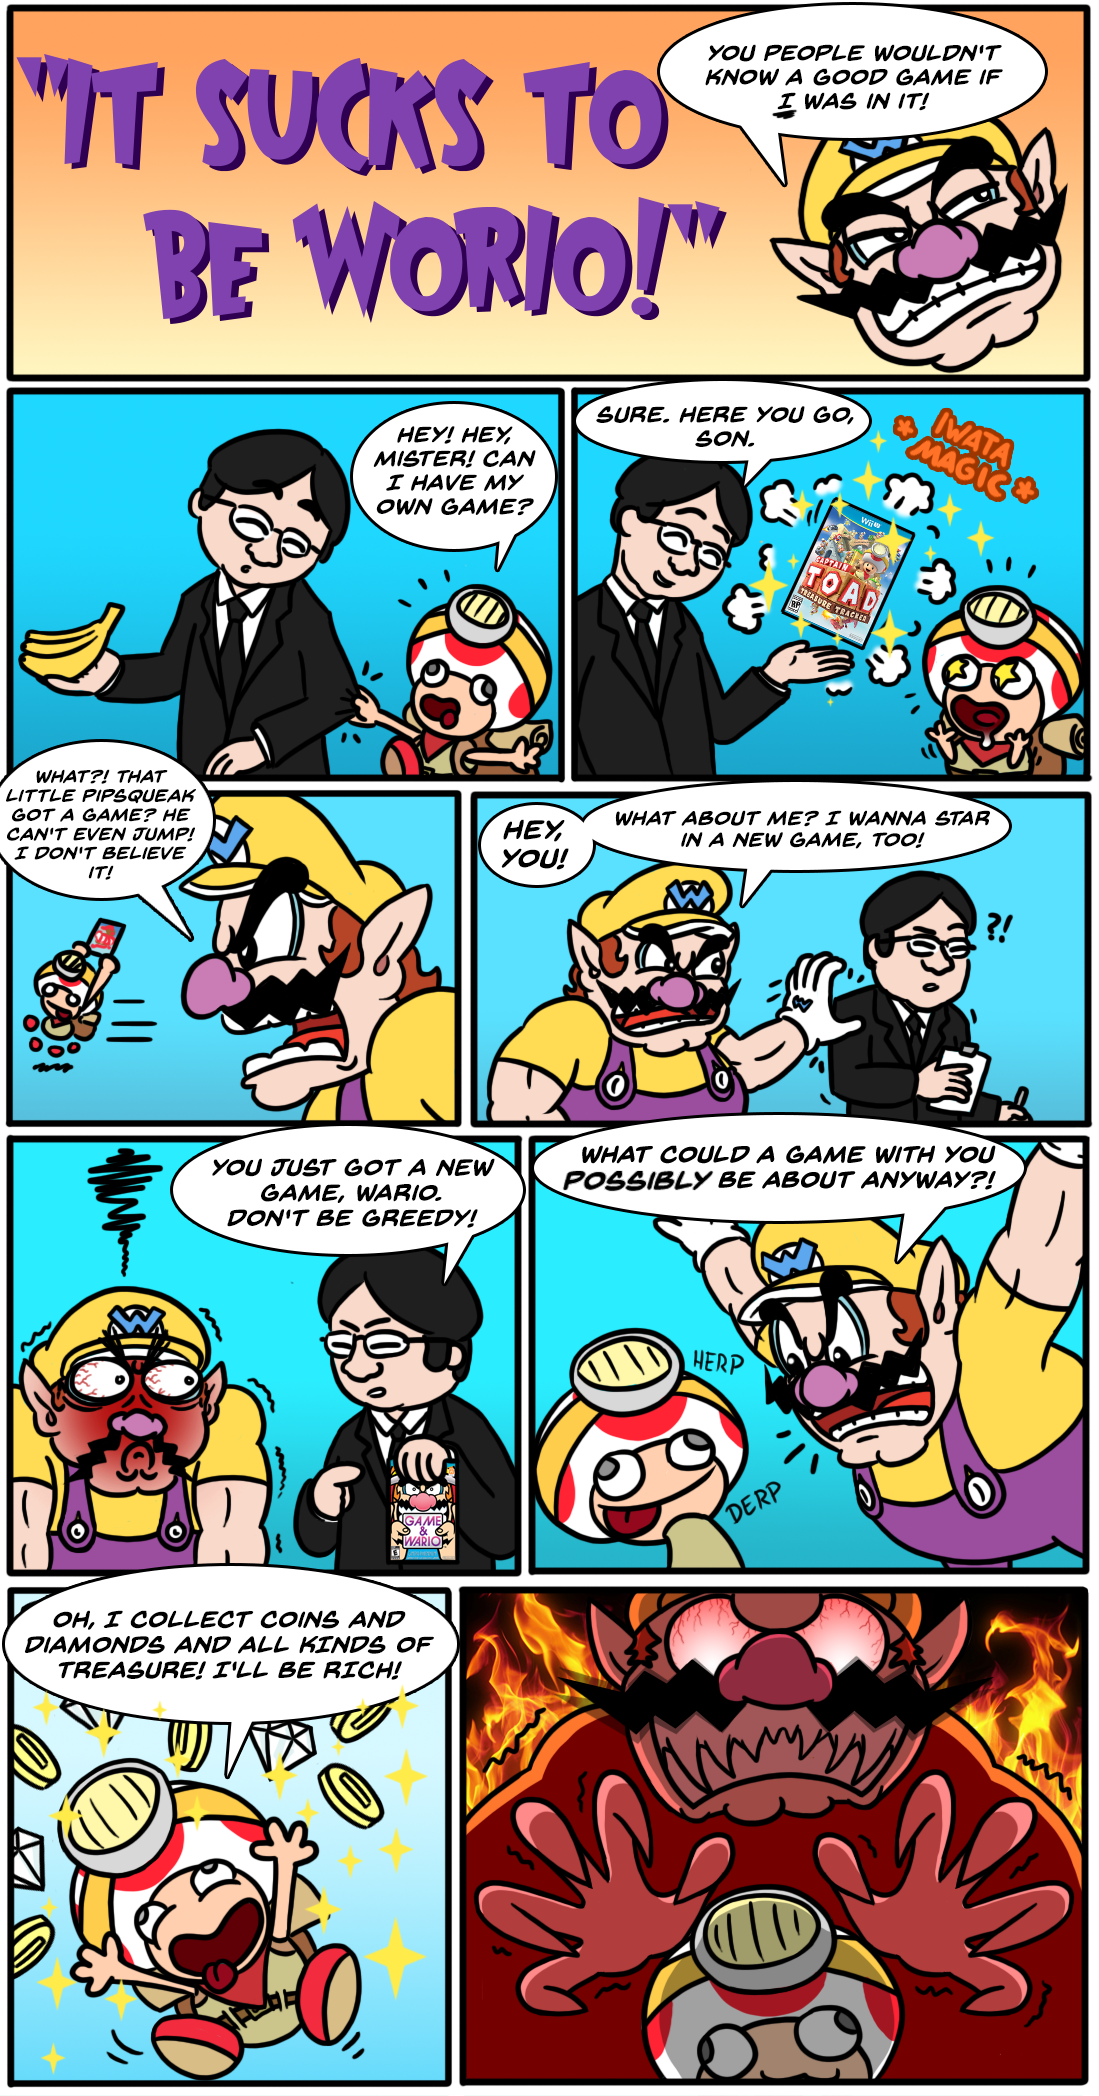 sucks_to_be_worio__starring_role_by_shyguyxxl-d7p3t99.png